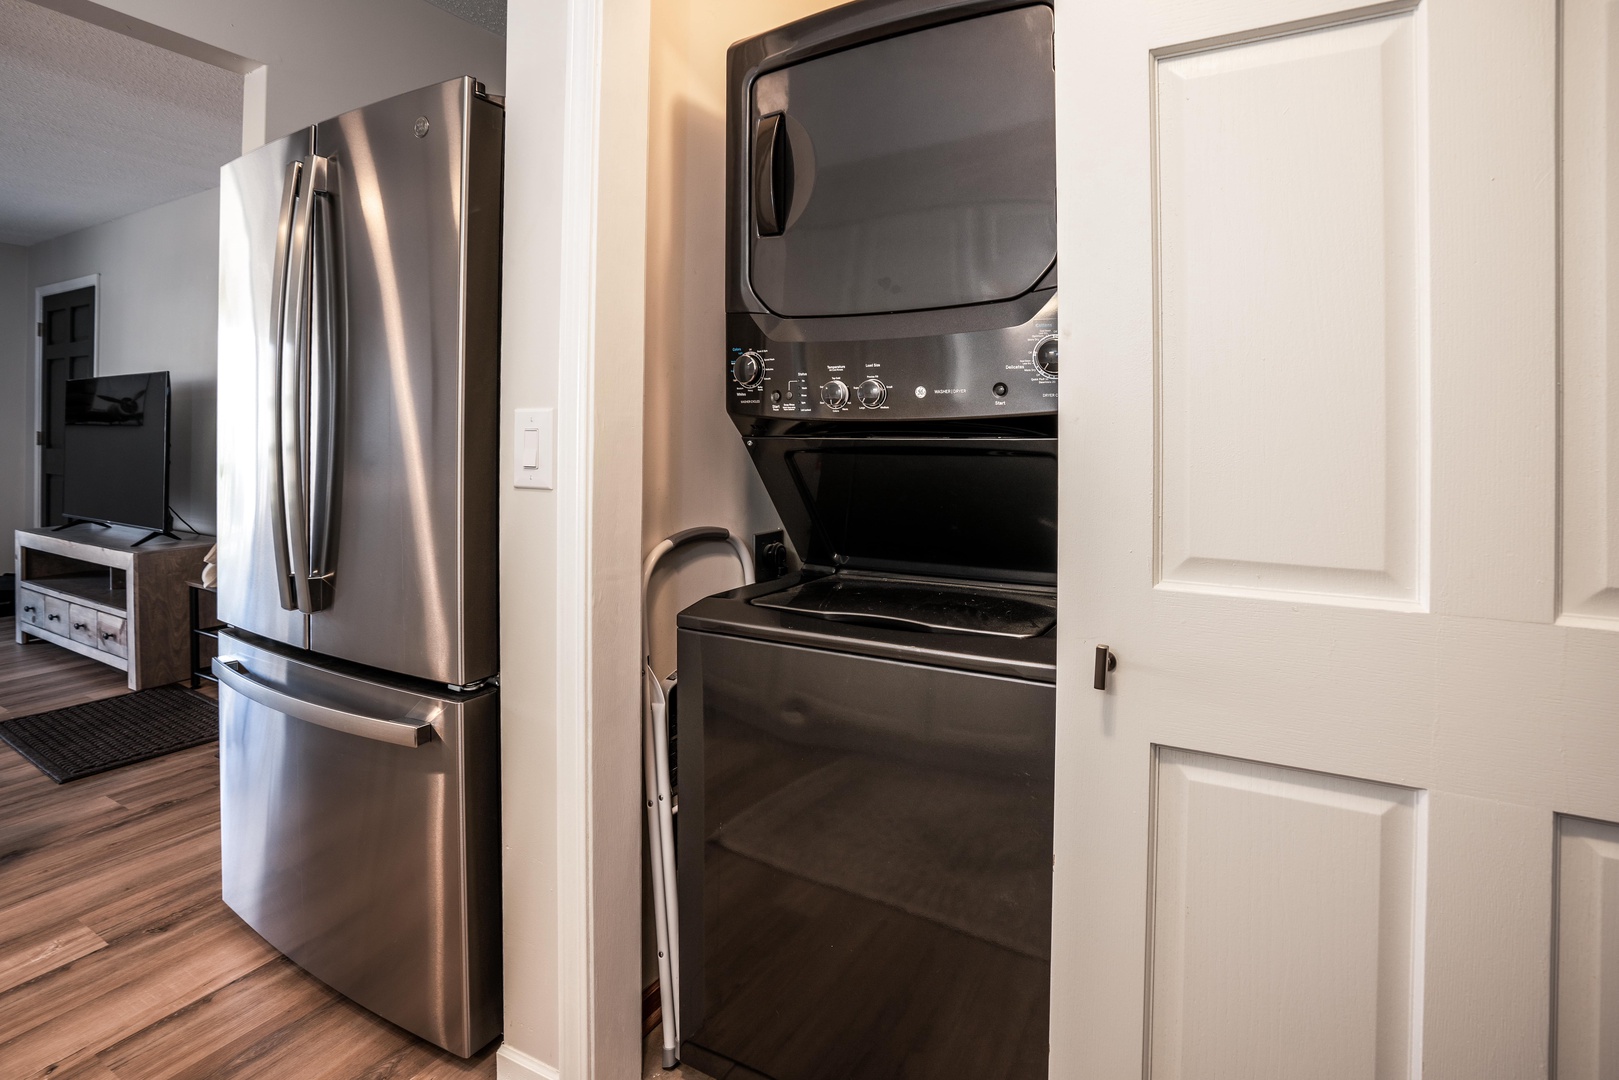 Private laundry is available for your stay, tucked away in the kitchen